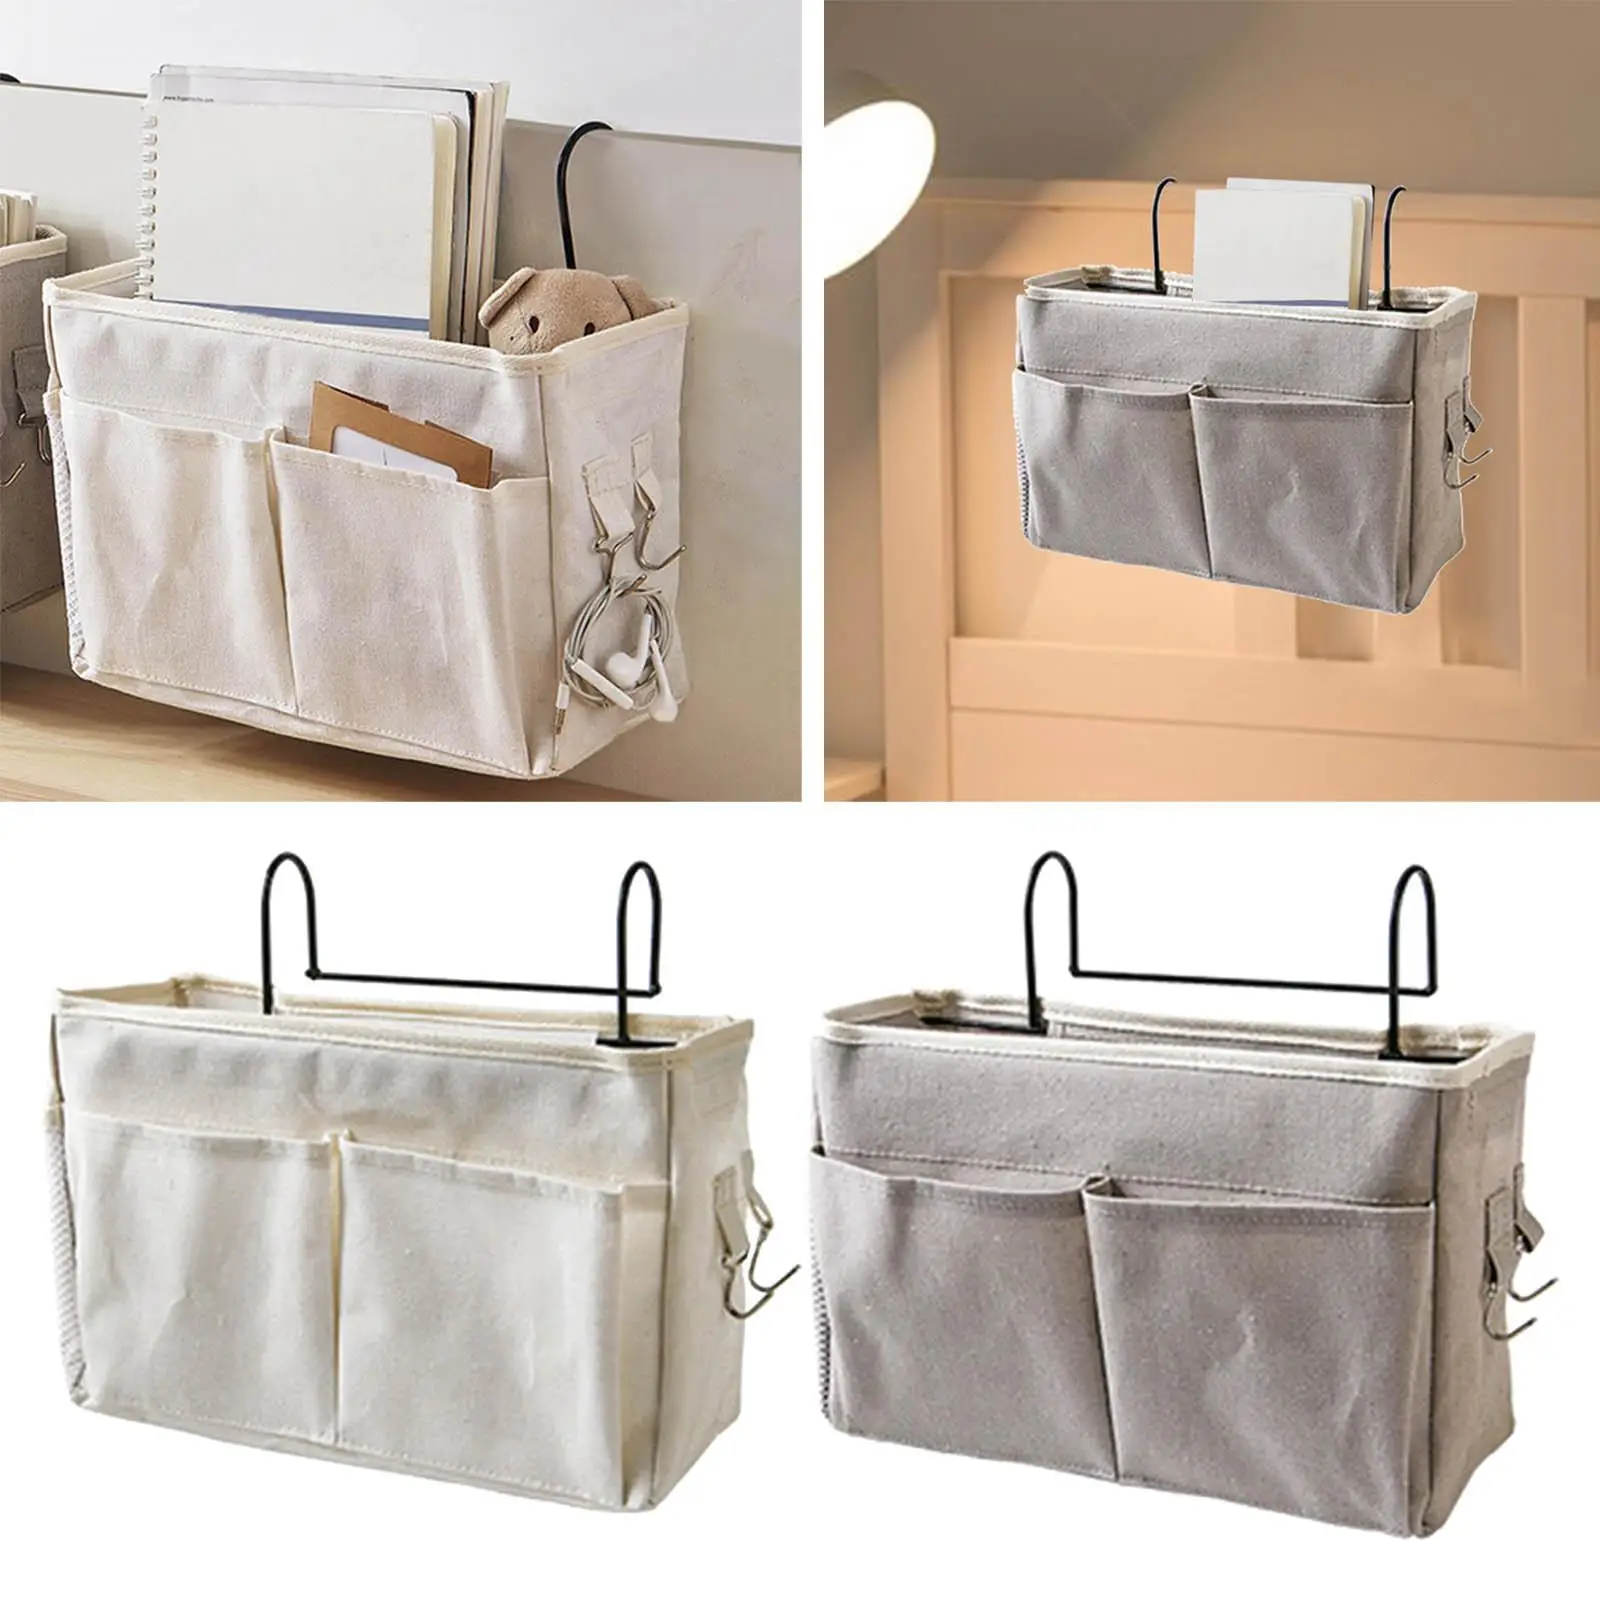 Bedside Caddy with 2 Hooks Hanging Organizer for Dorms TV Remote Control Magazine Bedside Handrail Pockets Baby Crib Bag